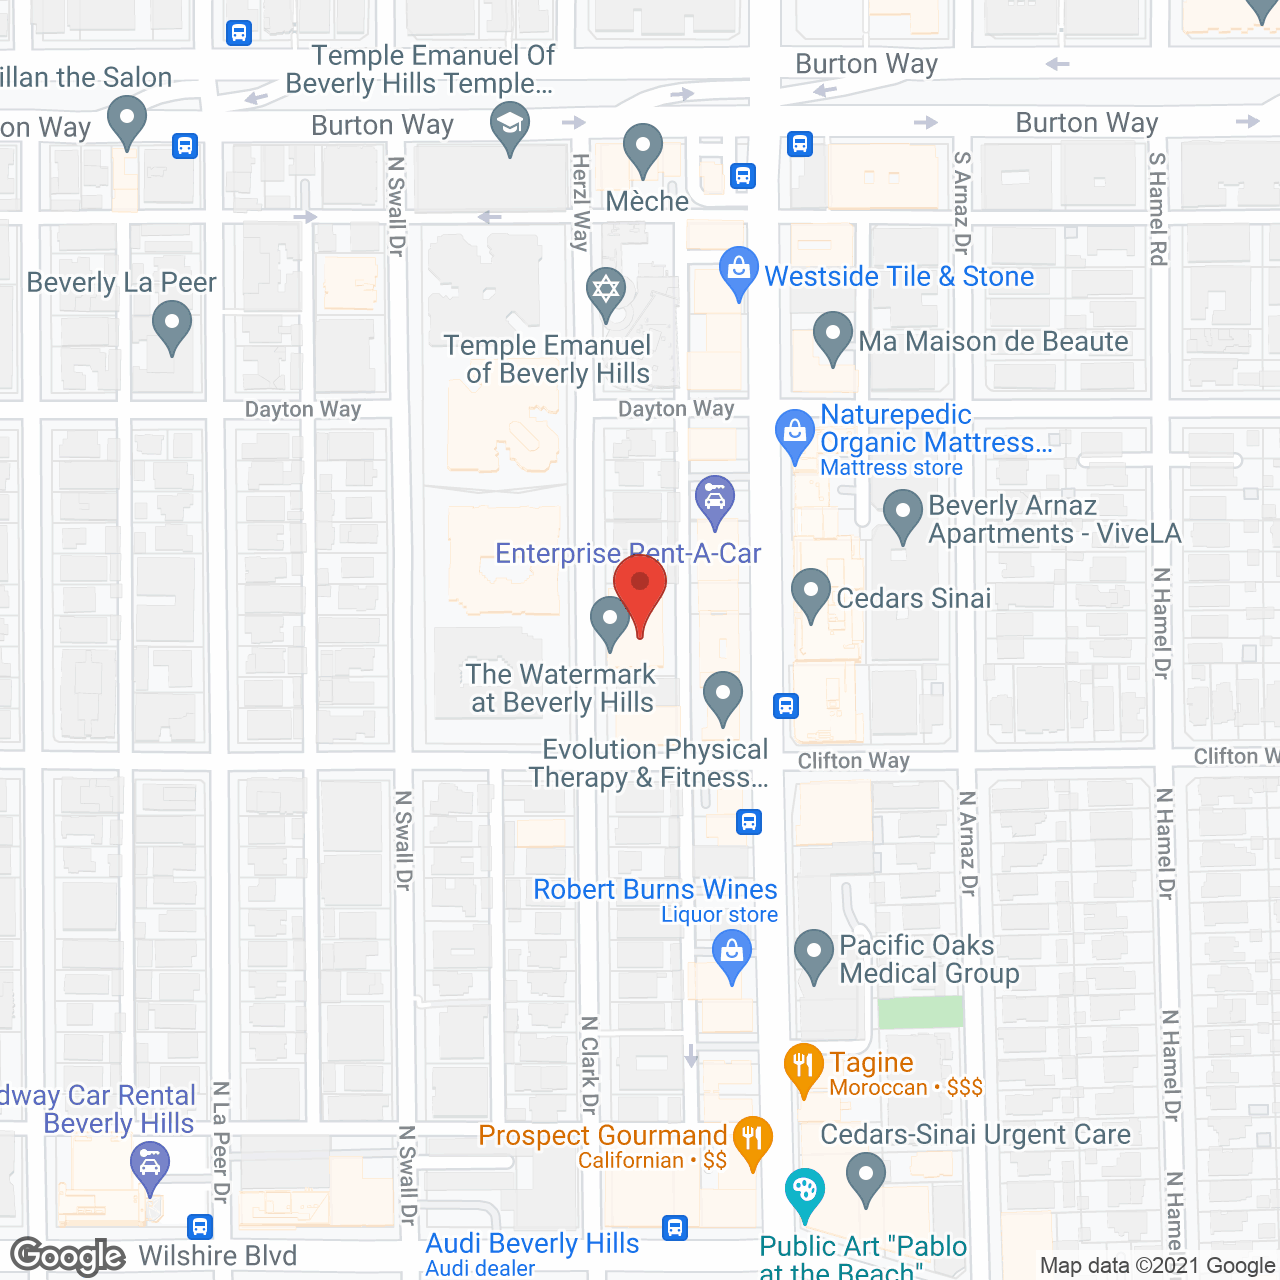 The Watermark at Beverly Hills in google map